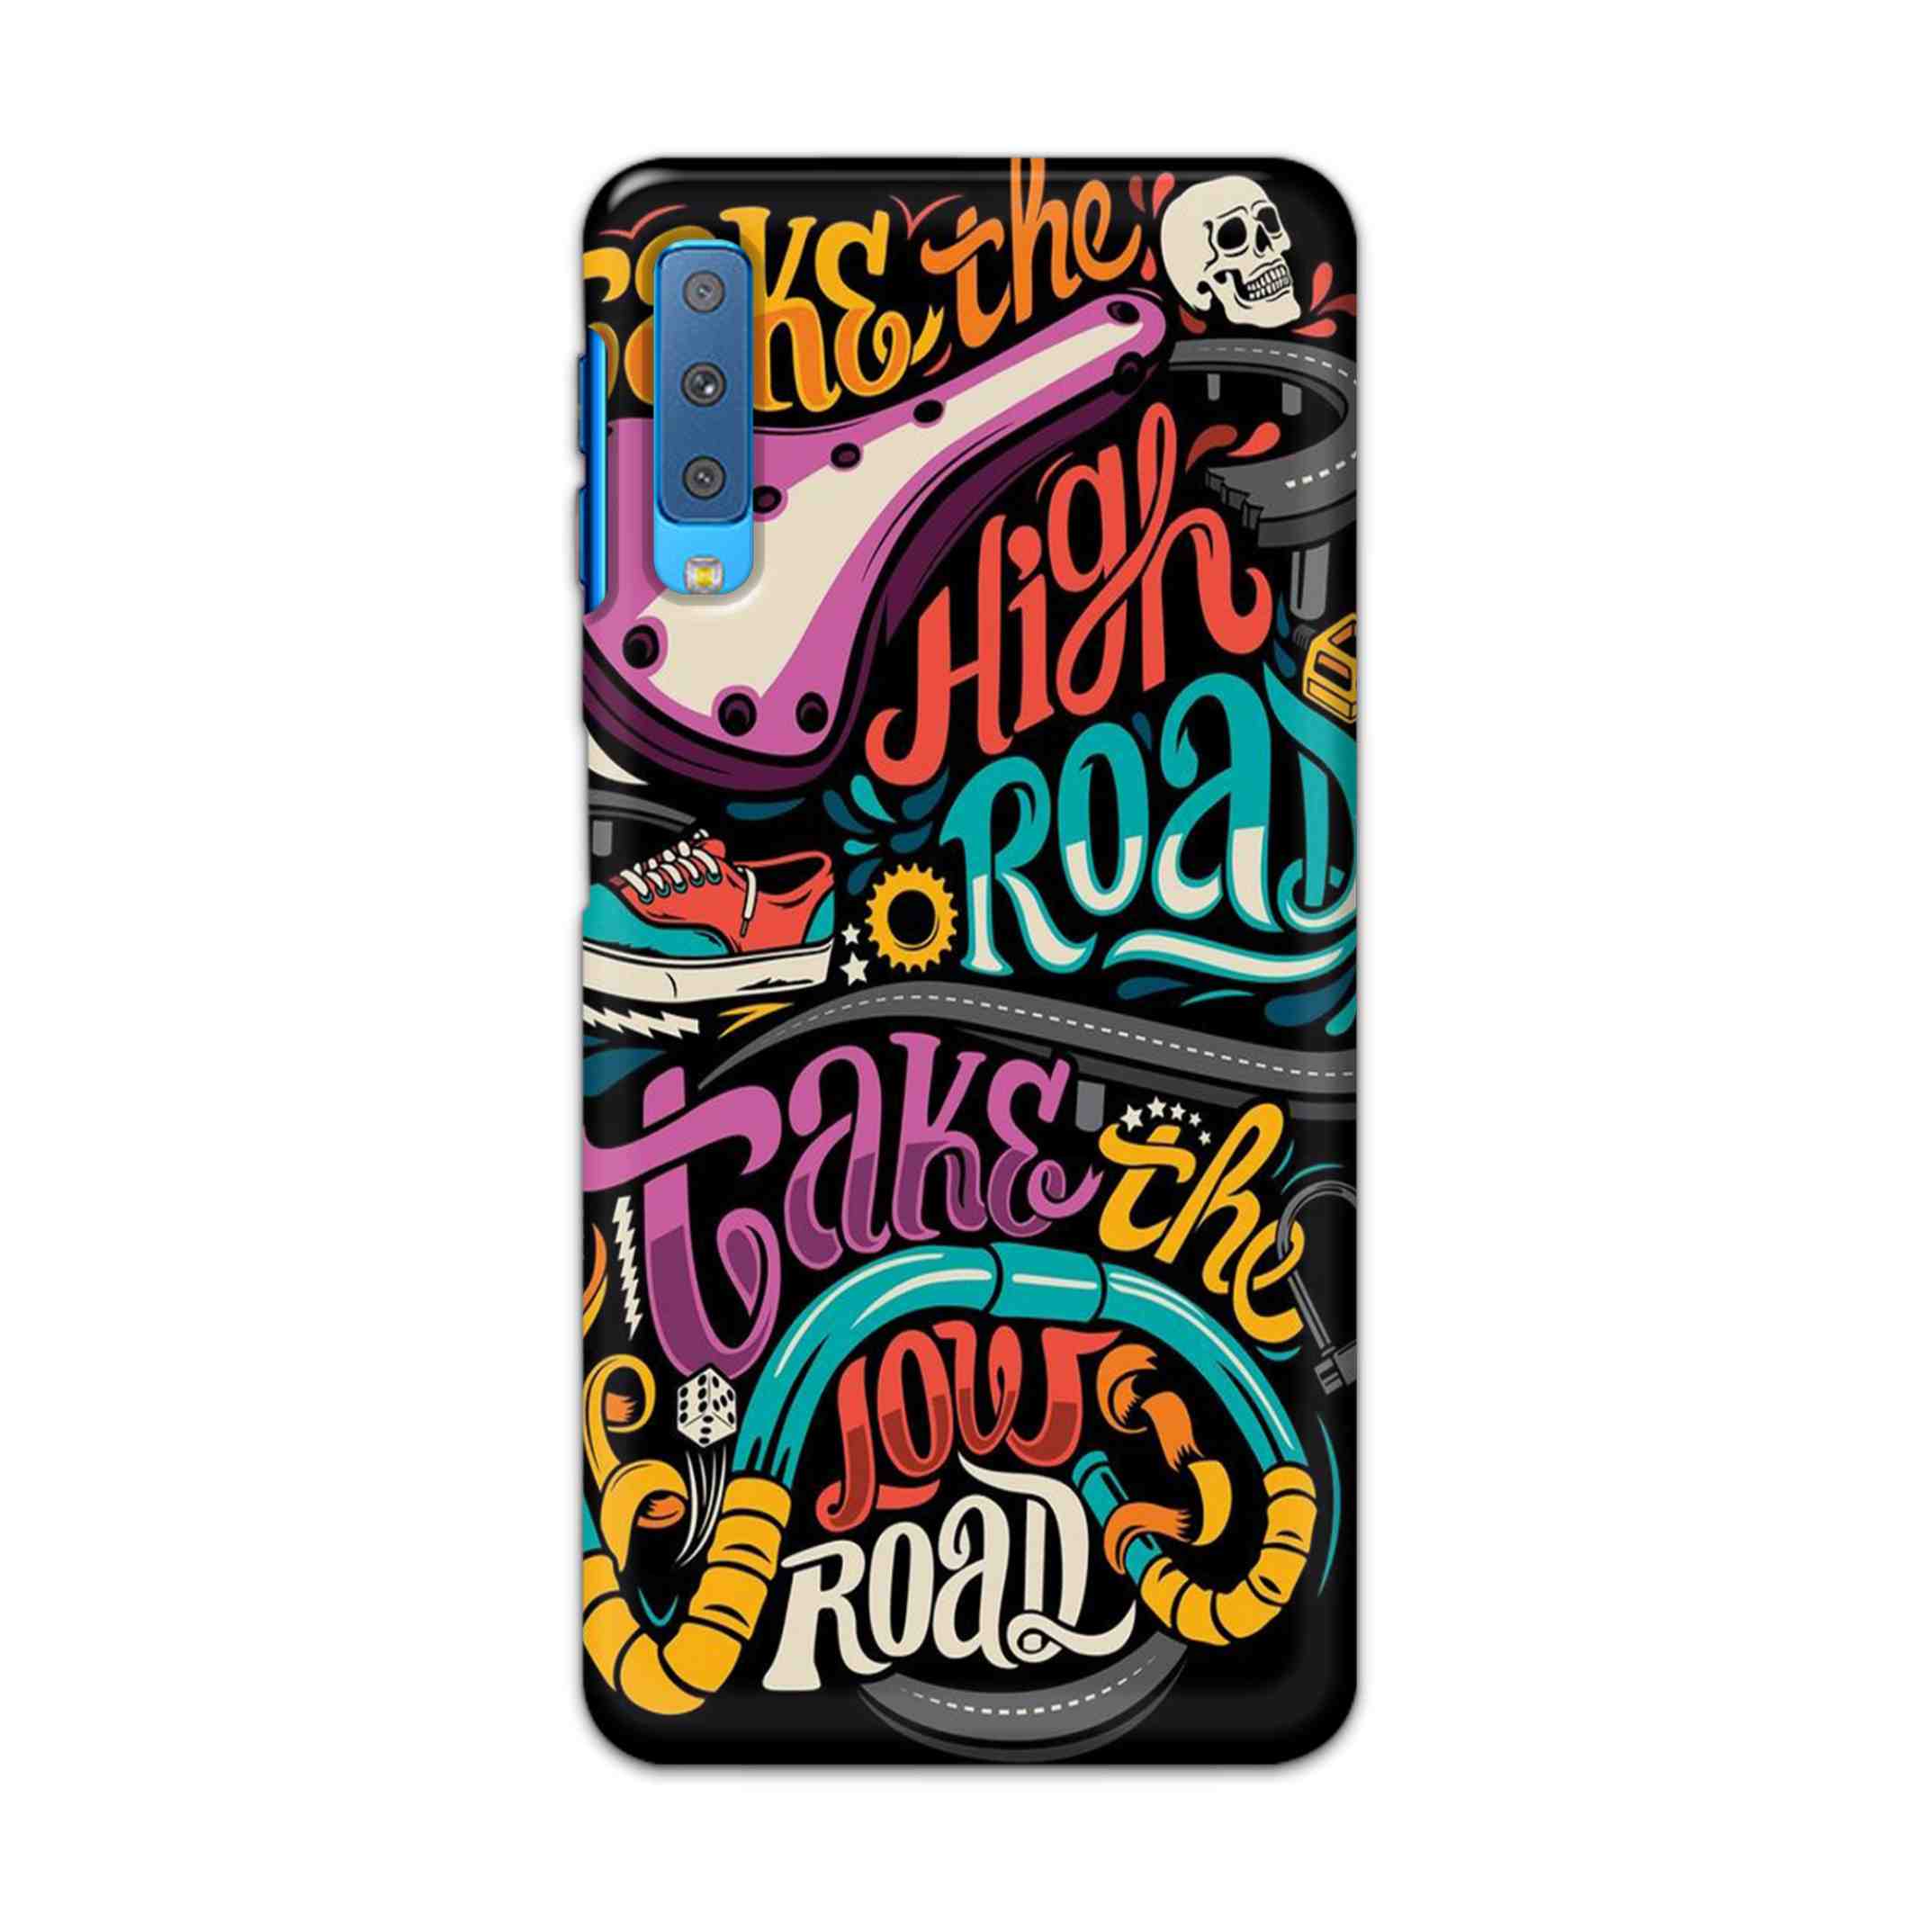 Buy Take The High Road Hard Back Mobile Phone Case Cover For Samsung Galaxy A7 2018 Online